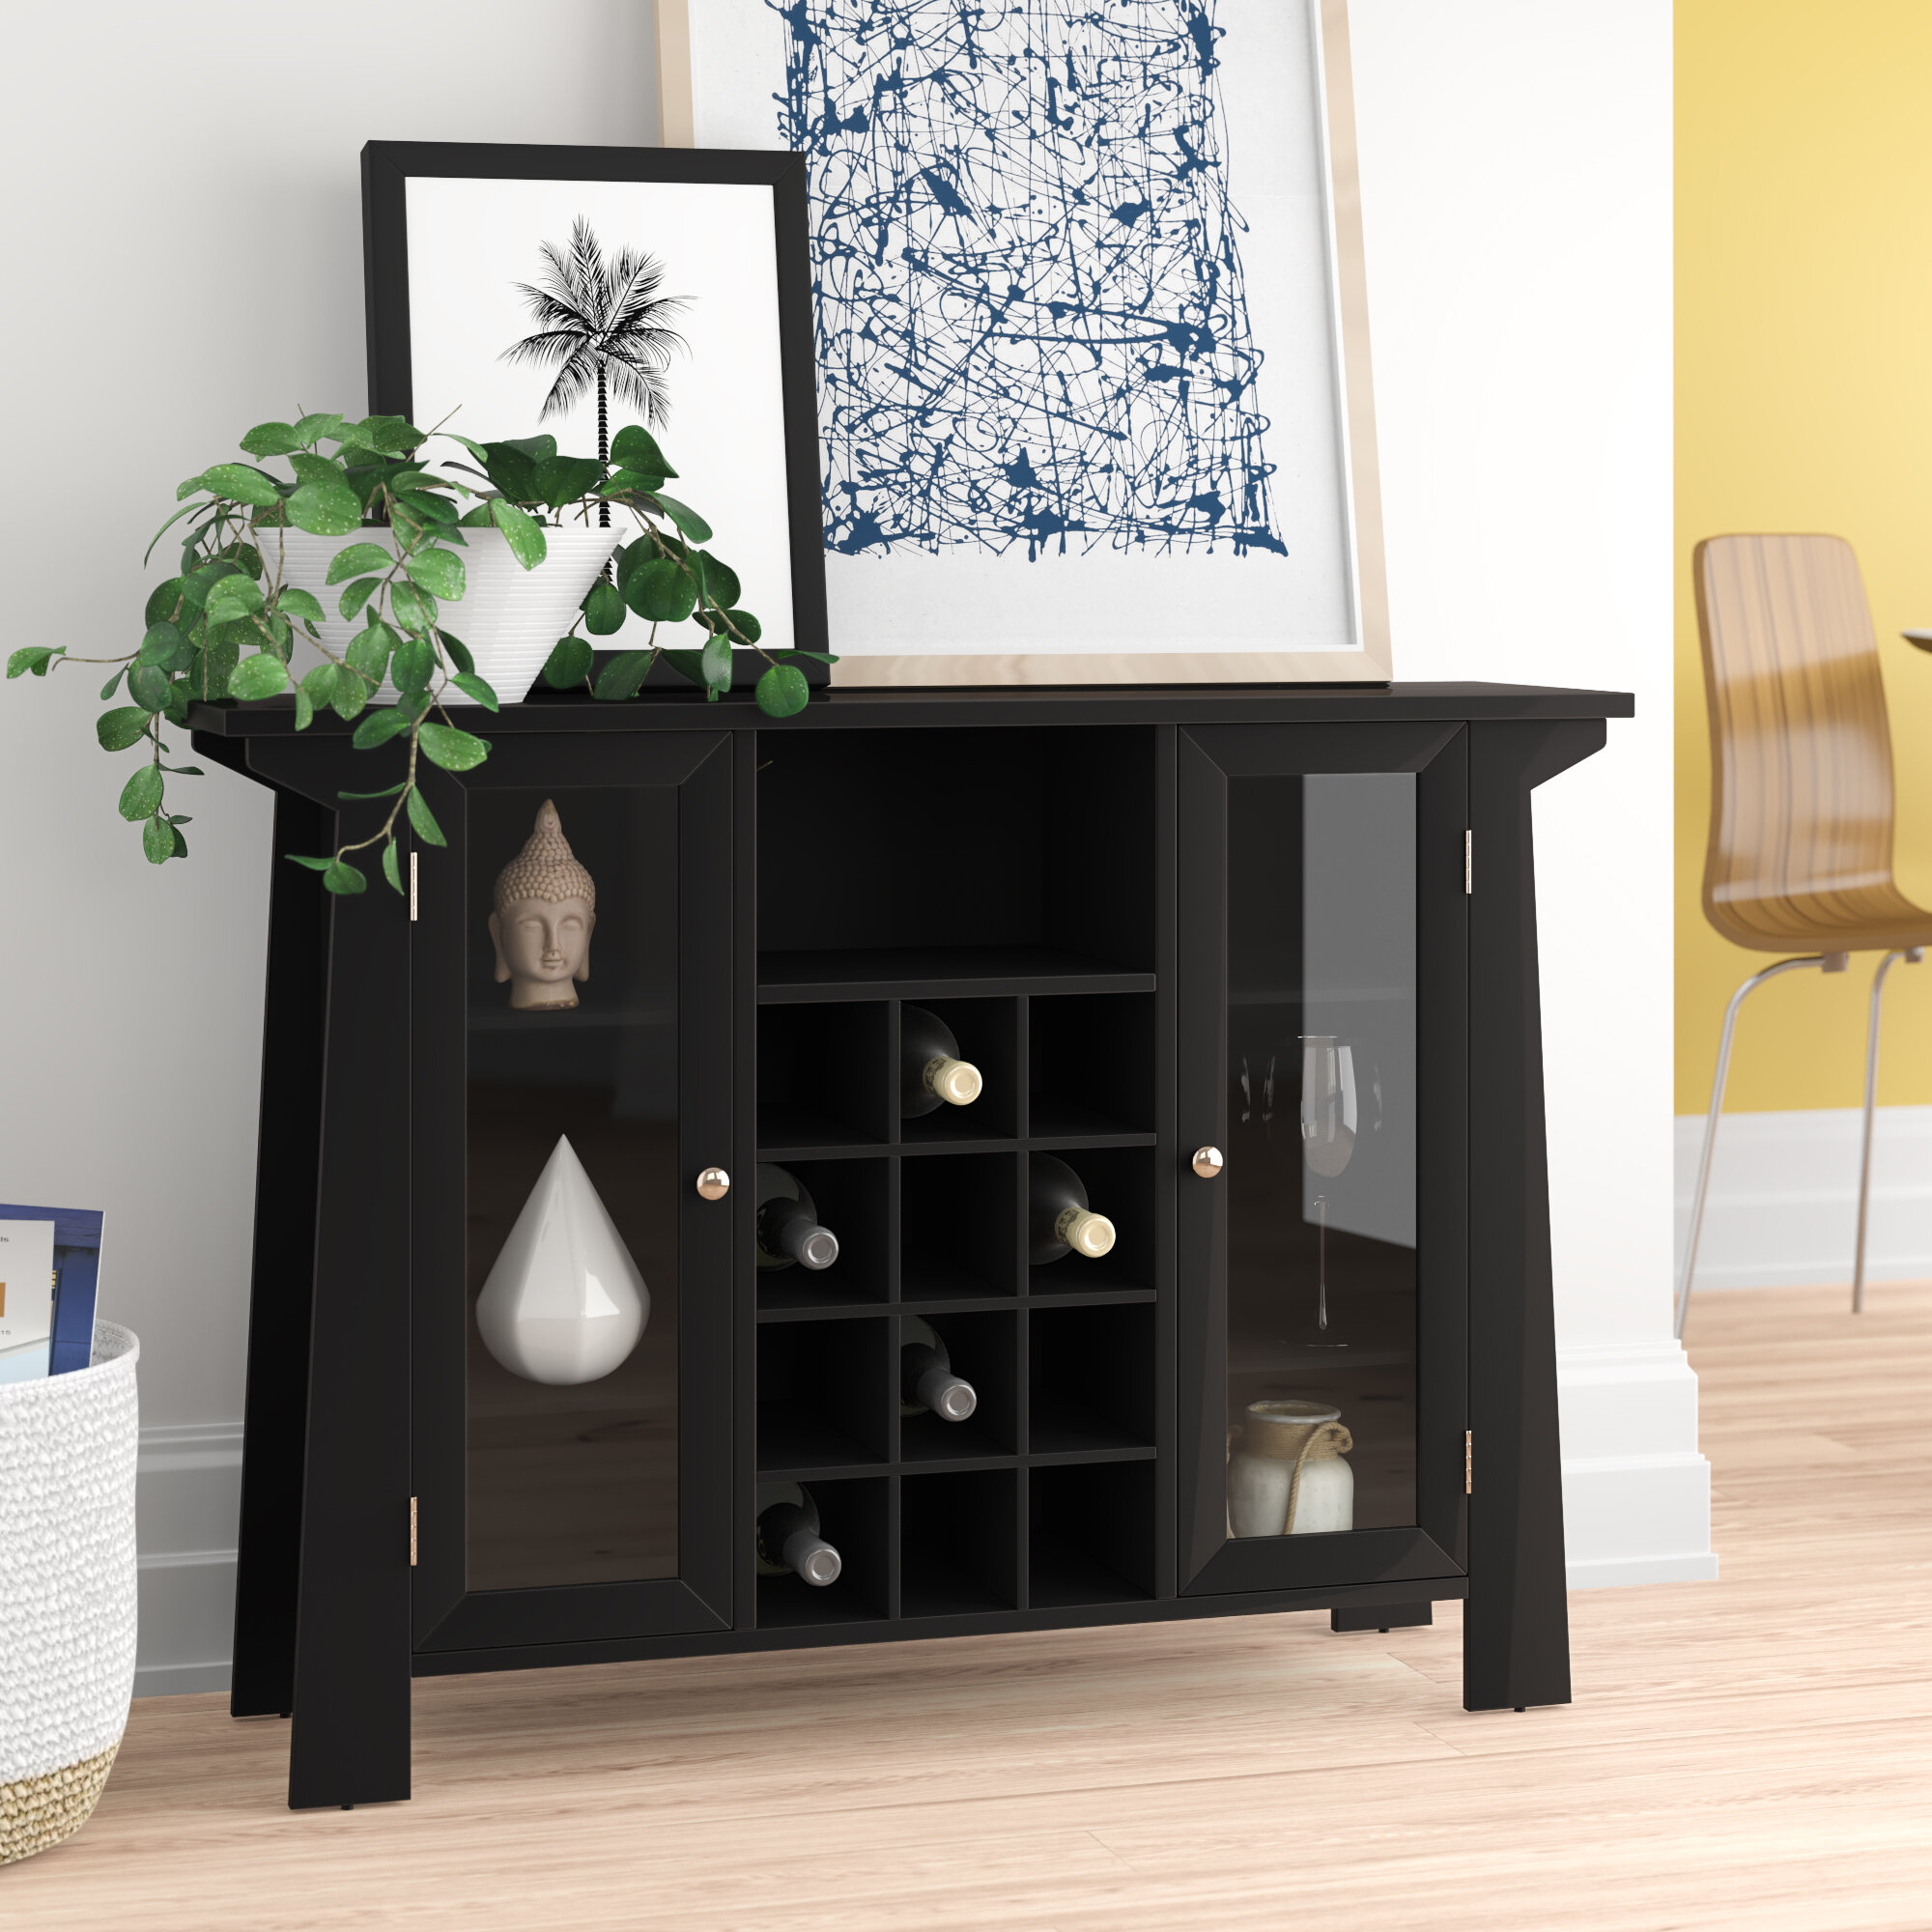 Bar Wine Cabinets Youll Love In 2019 Wayfair throughout dimensions 2000 X 2000